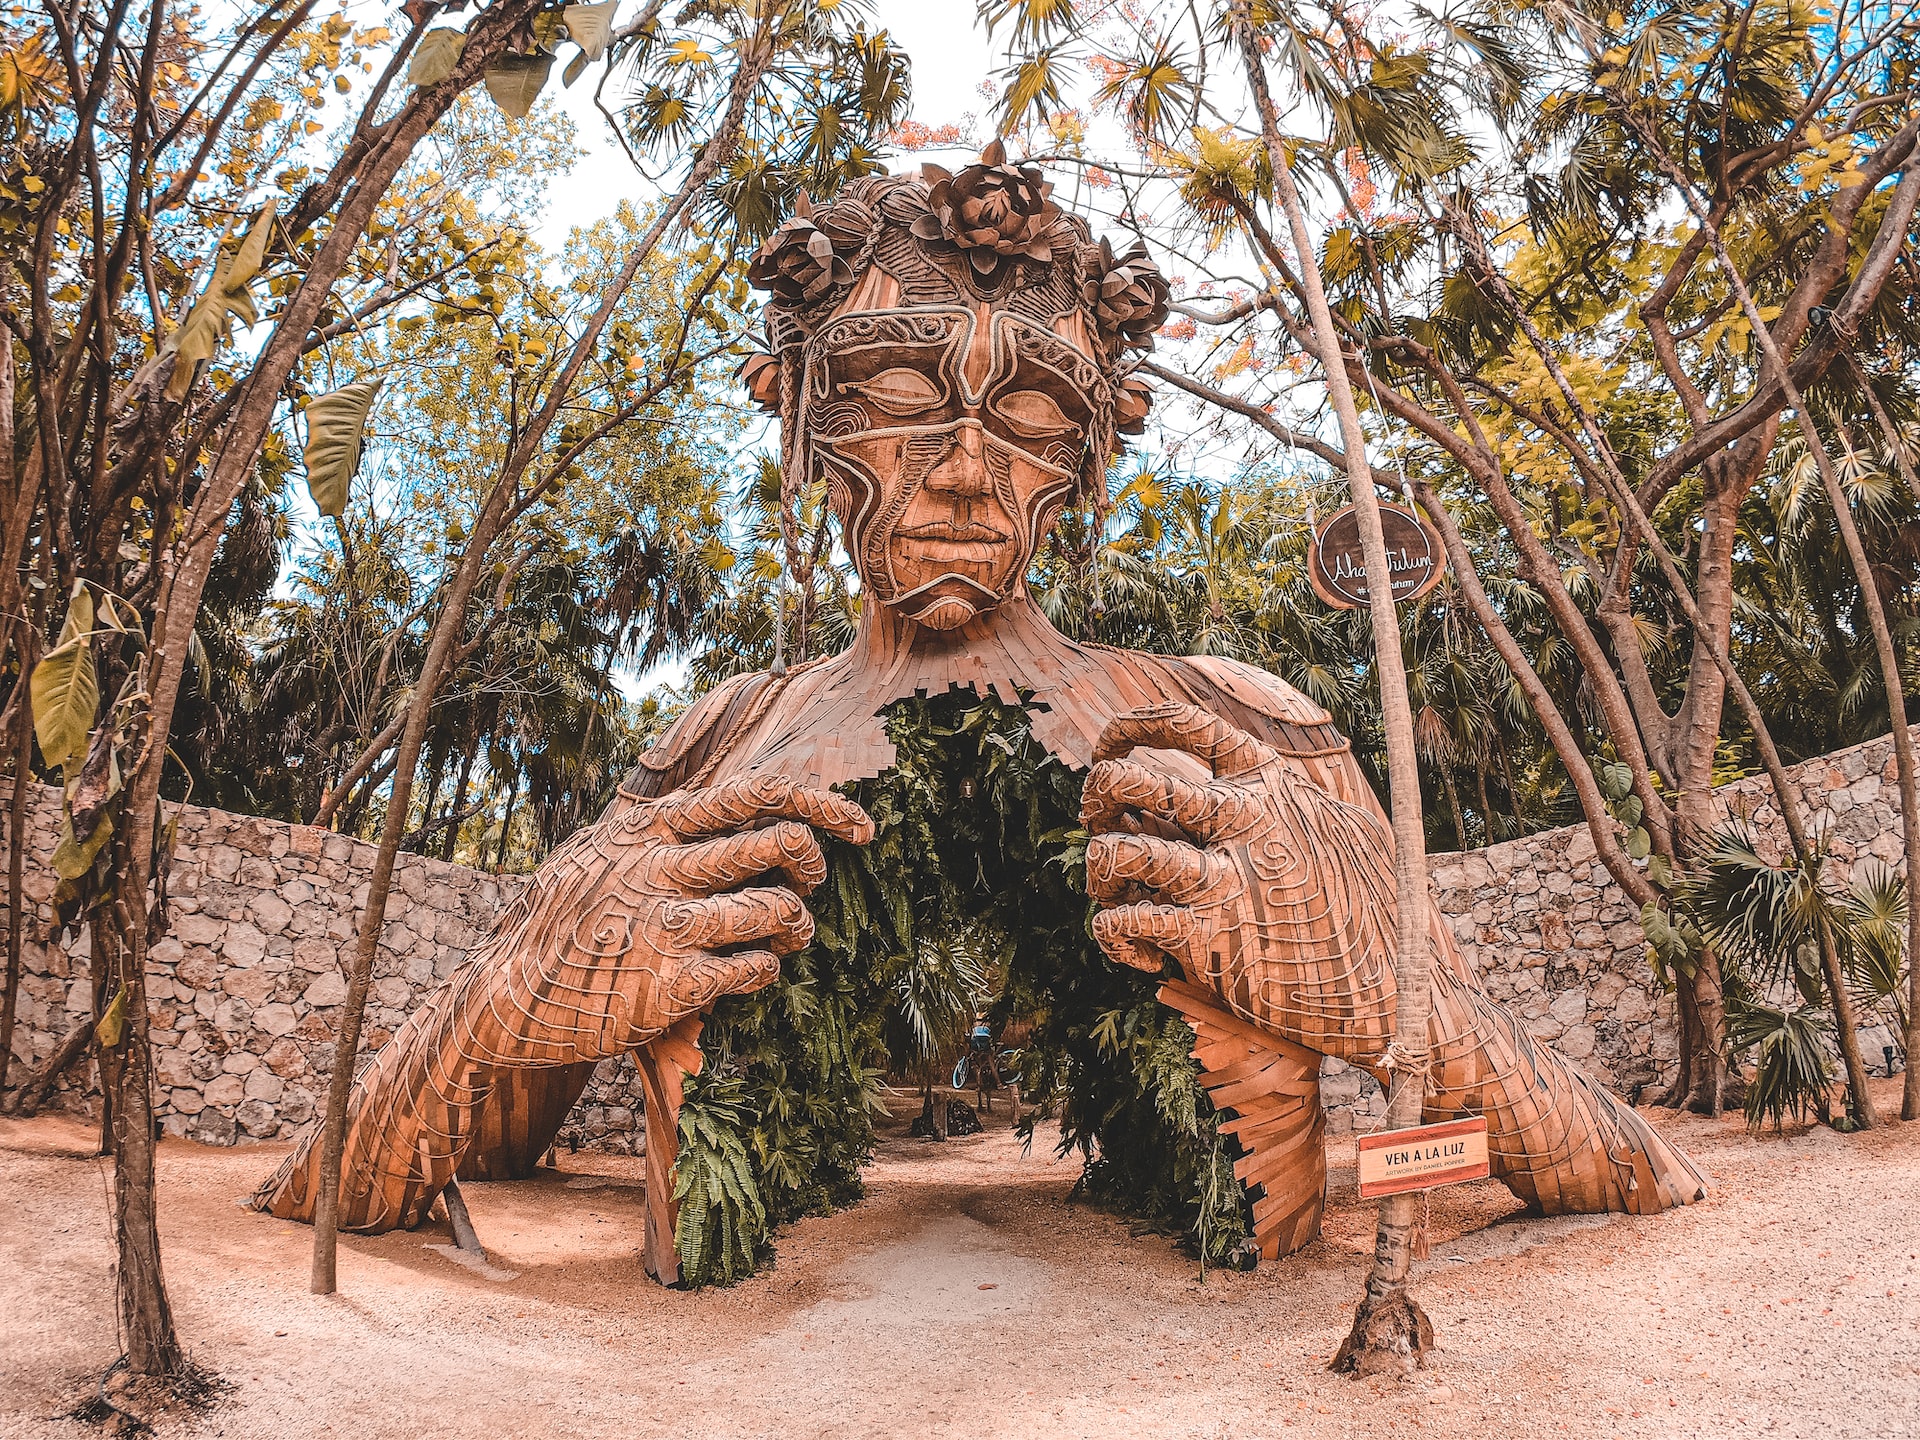 The "Coming into Light" statue in Tulum.